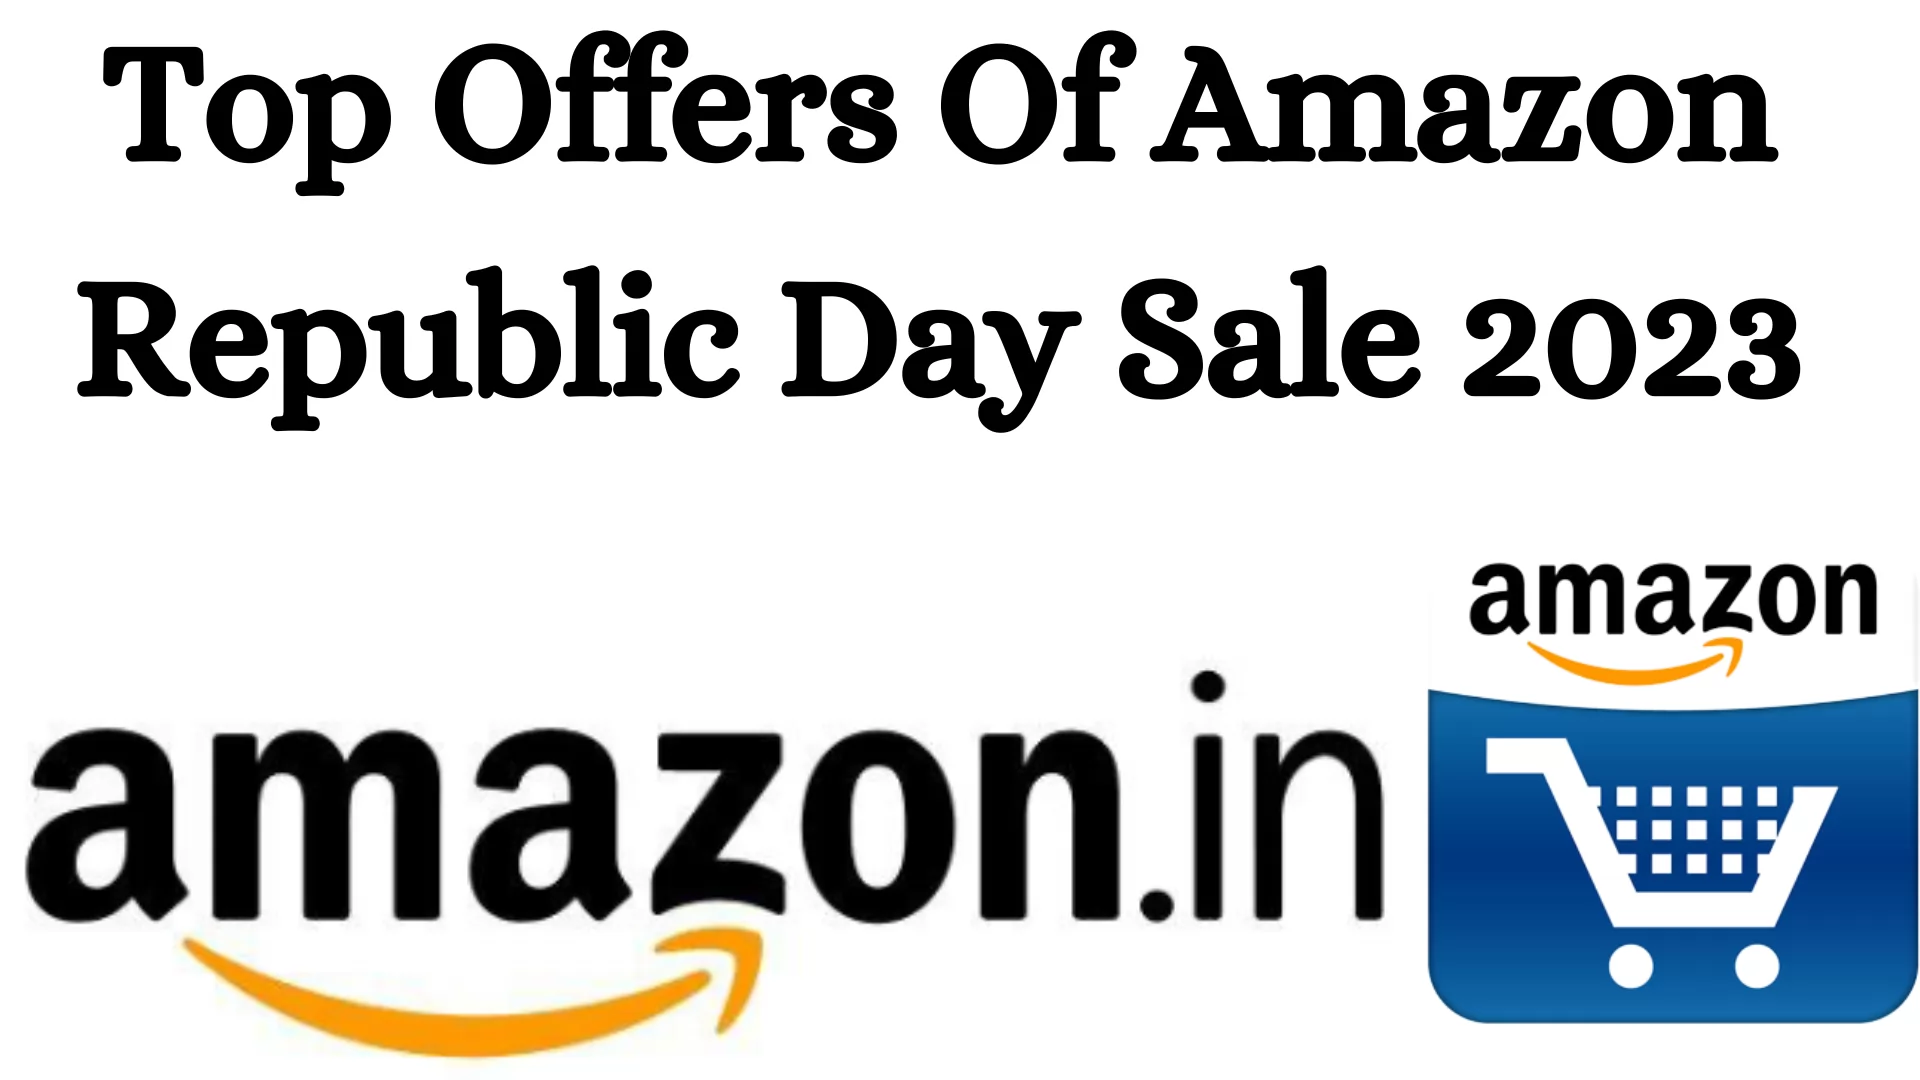 Top Offers of Amazon Republic Day Sale 2023